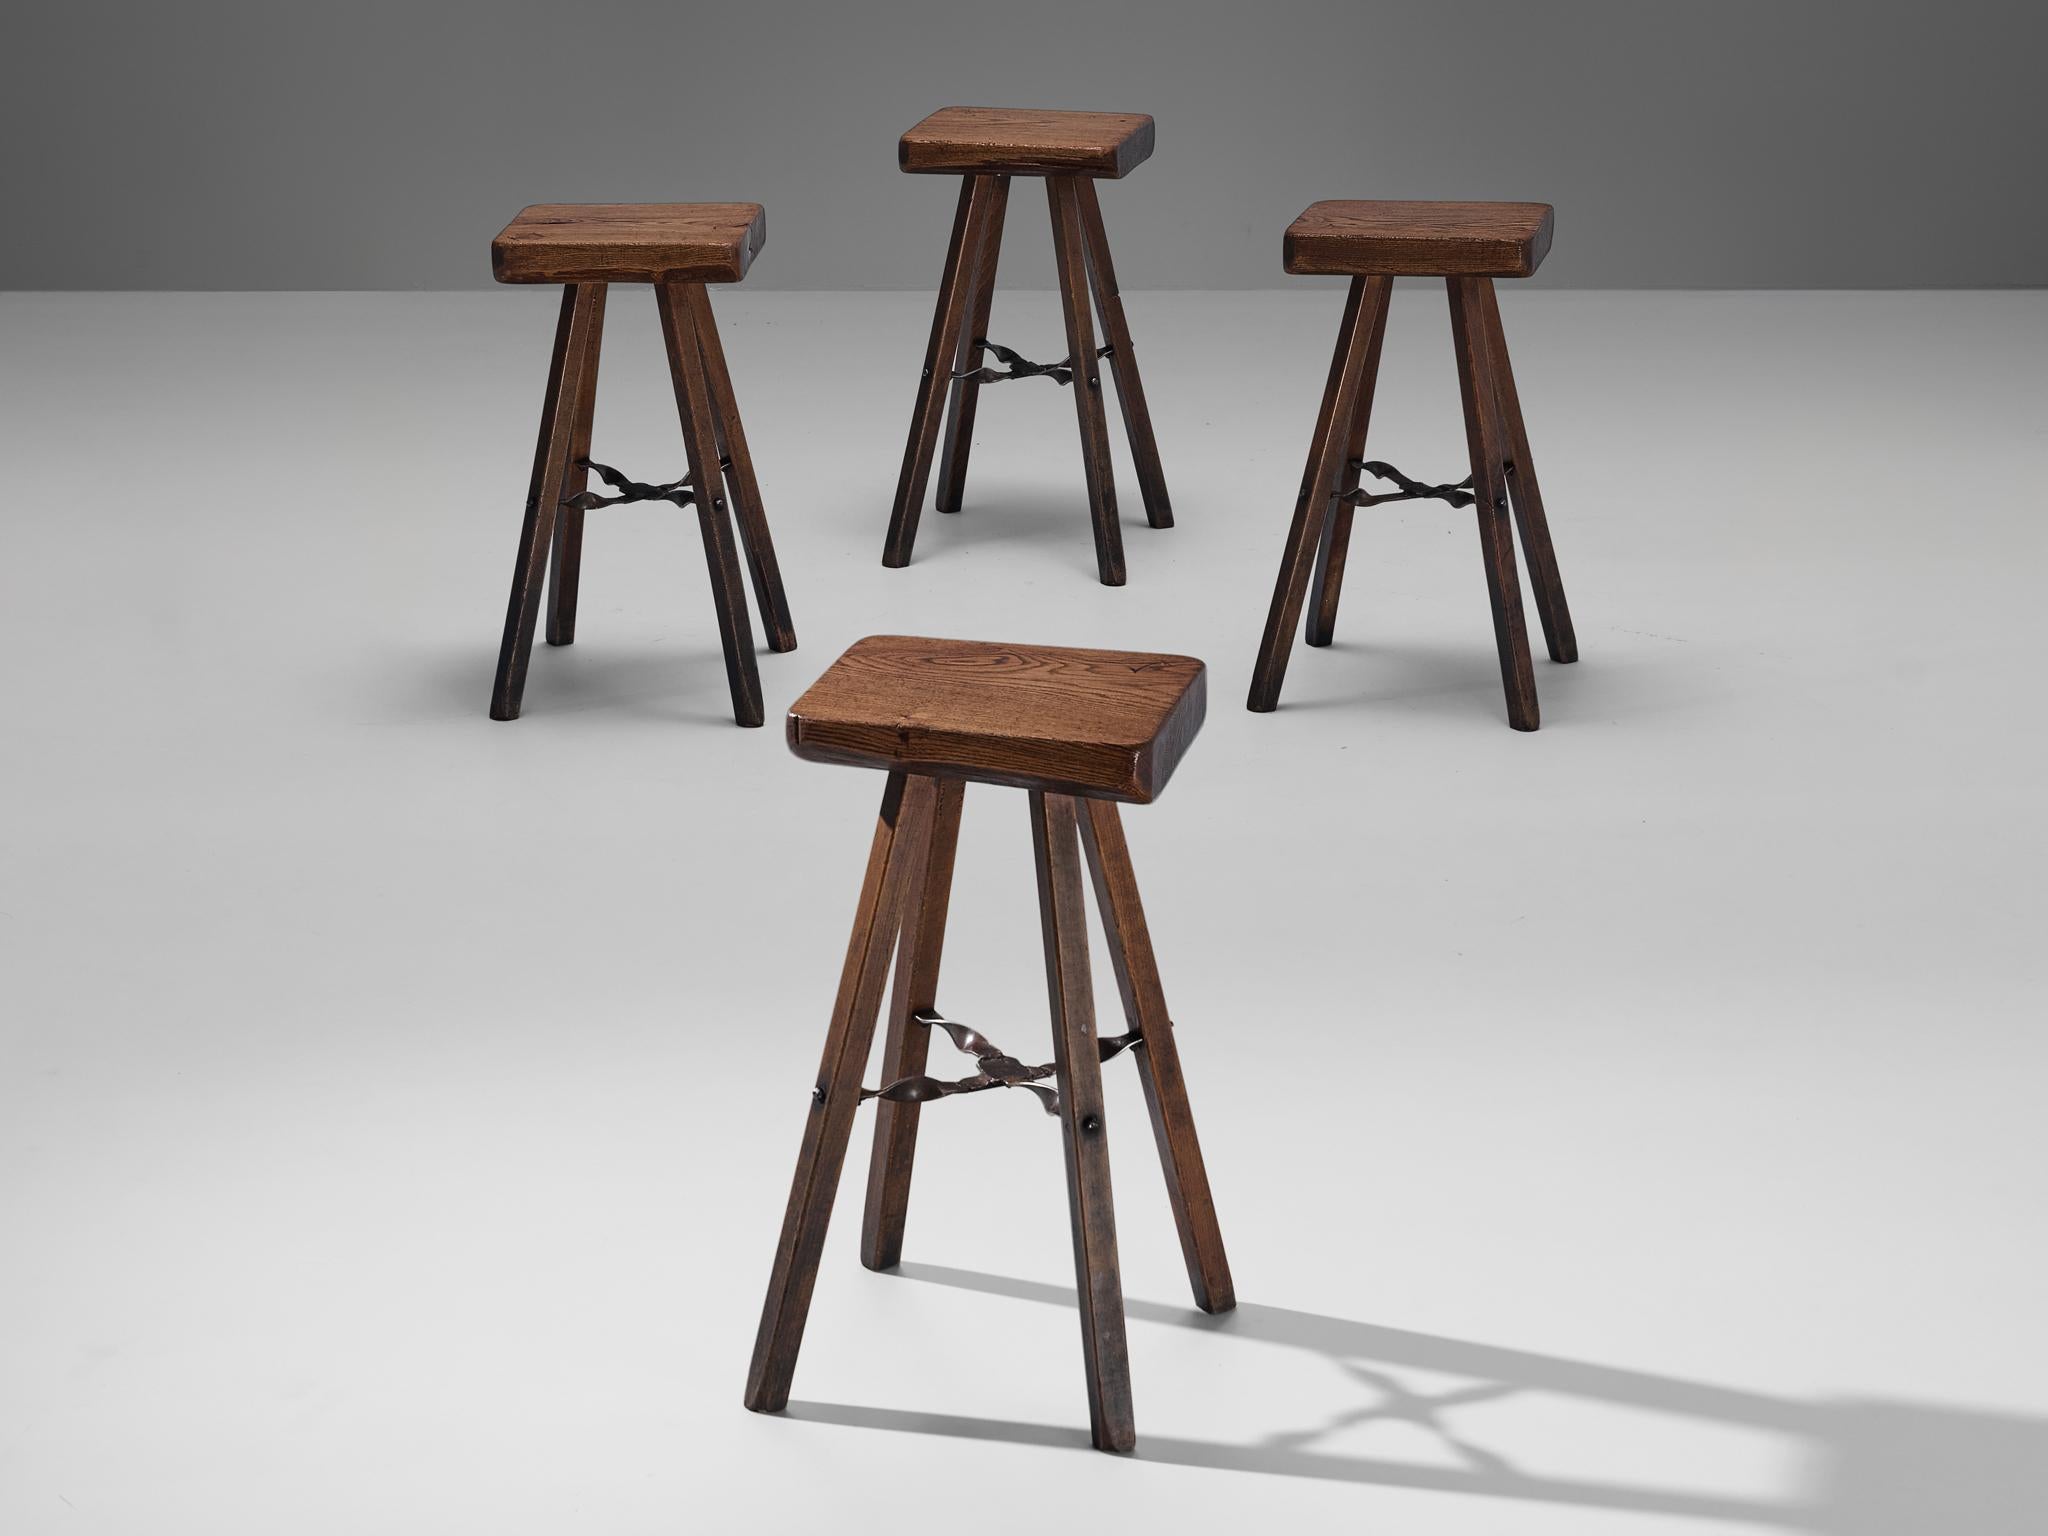 Mobichalet, high stools, stained pine, iron, Belgium, 1950s.

These high stools are produced by Mobichalet in the 1950s. The stools are all slightly different in form, imparting the pieces with a rustic and naturalistic look. 
The chairs have a